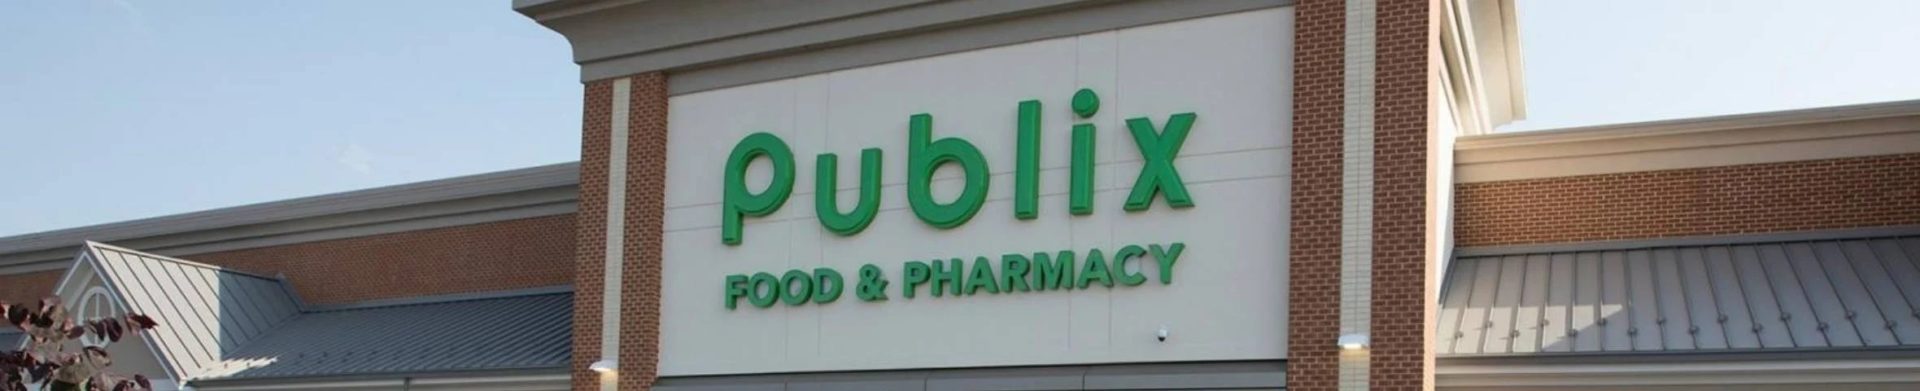 Publix storefront in the daytime